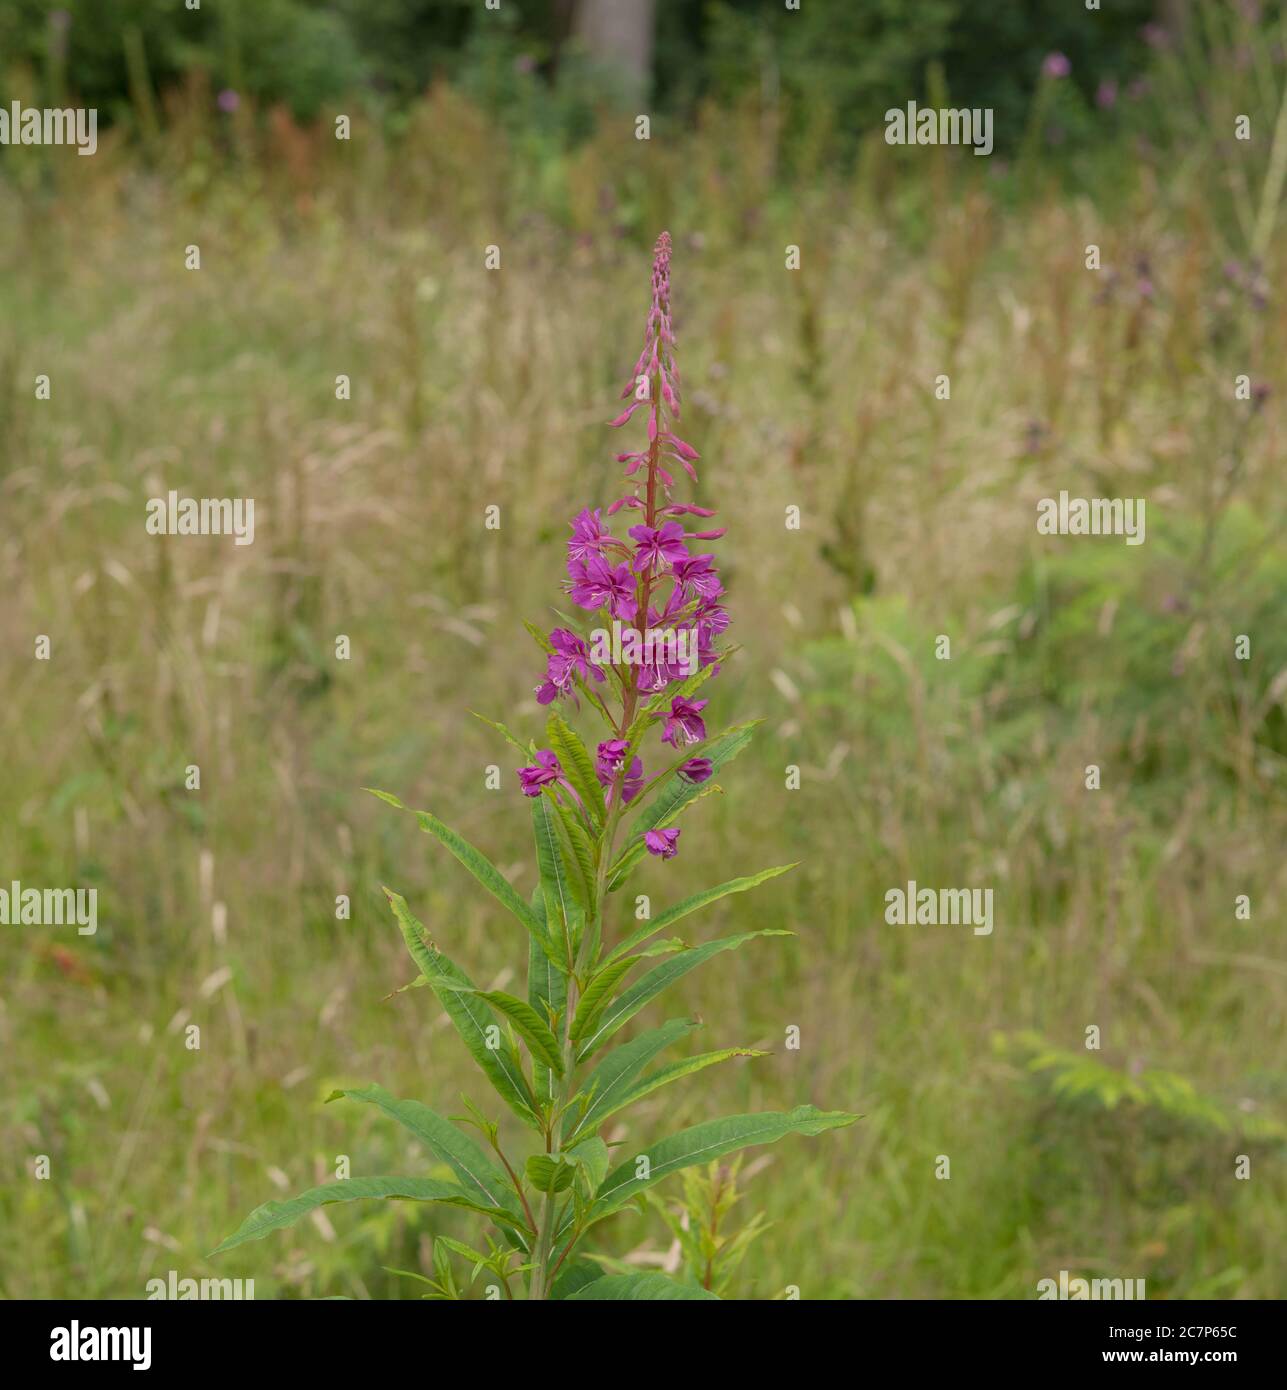 Close Up of Summer Flowering Rosebay Willowherb Wildflower (Chamerion angustifolium) Growing in a Grassy Verge on the Edge of a Forest in Devon Stock Photo